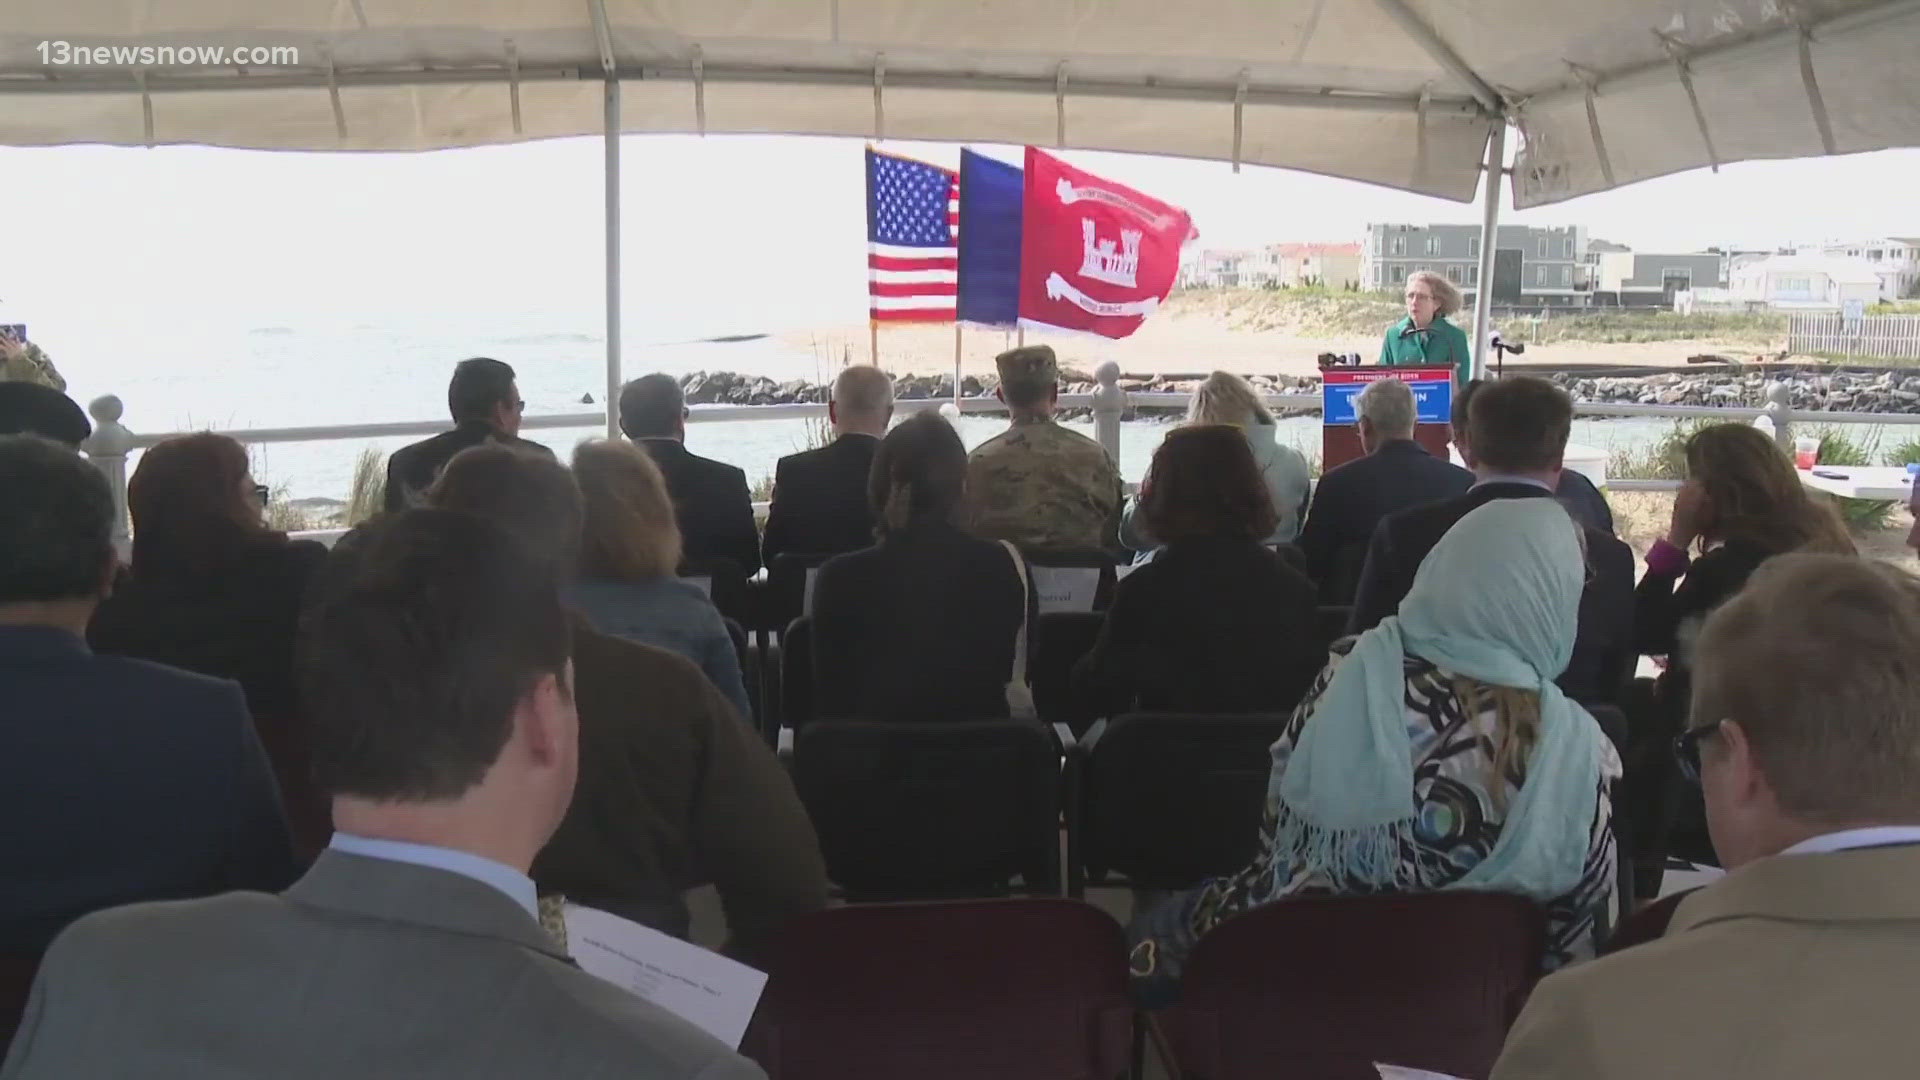 The US Army Corps of Engineers hosted a groundbreaking ceremony for upcoming restoration projects in Hampton Roads.